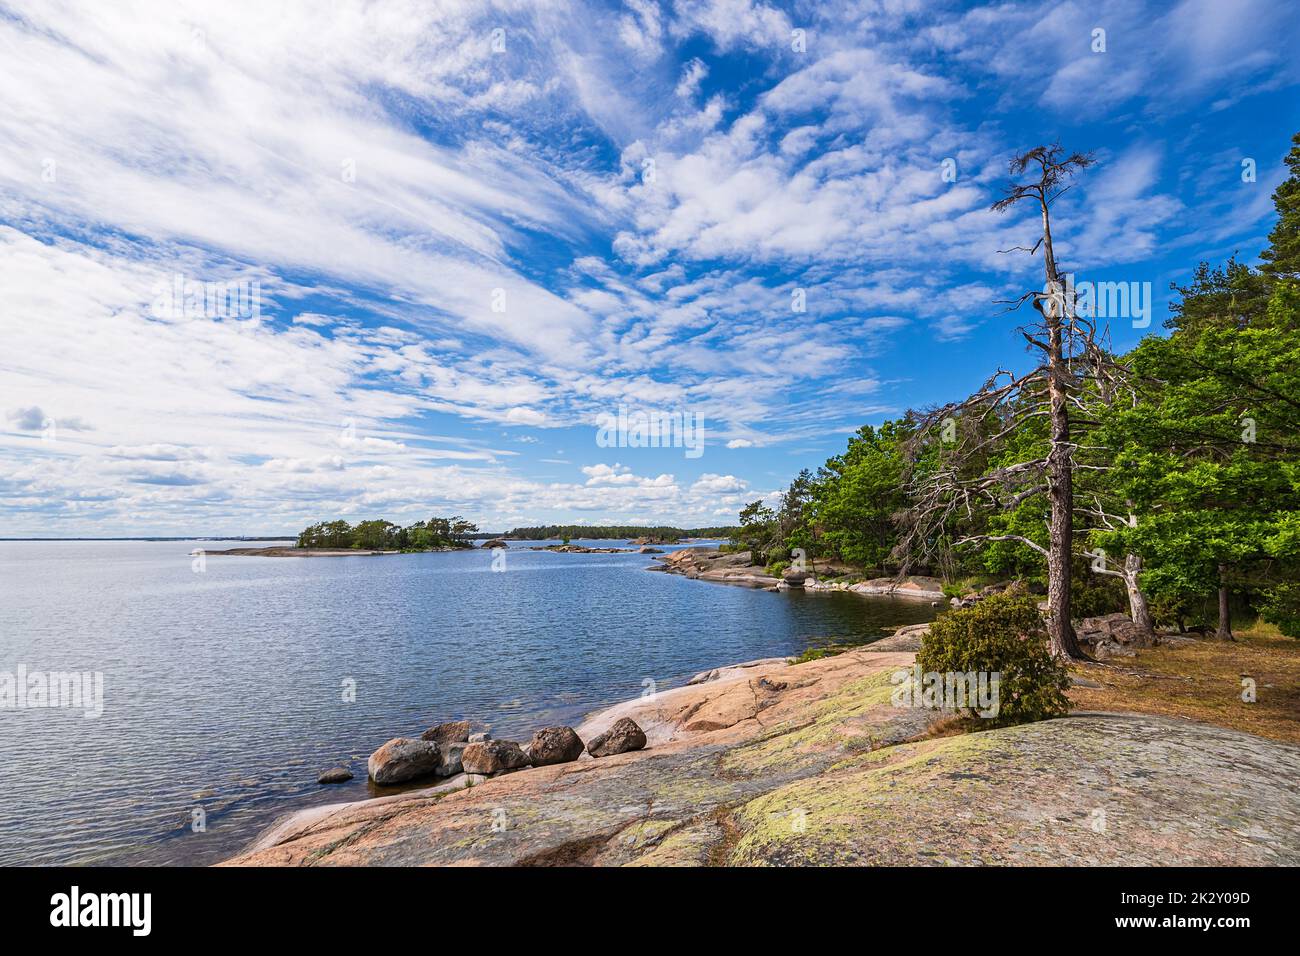 Landscape with rocks and trees near Oskashamn in Sweden Stock Photo